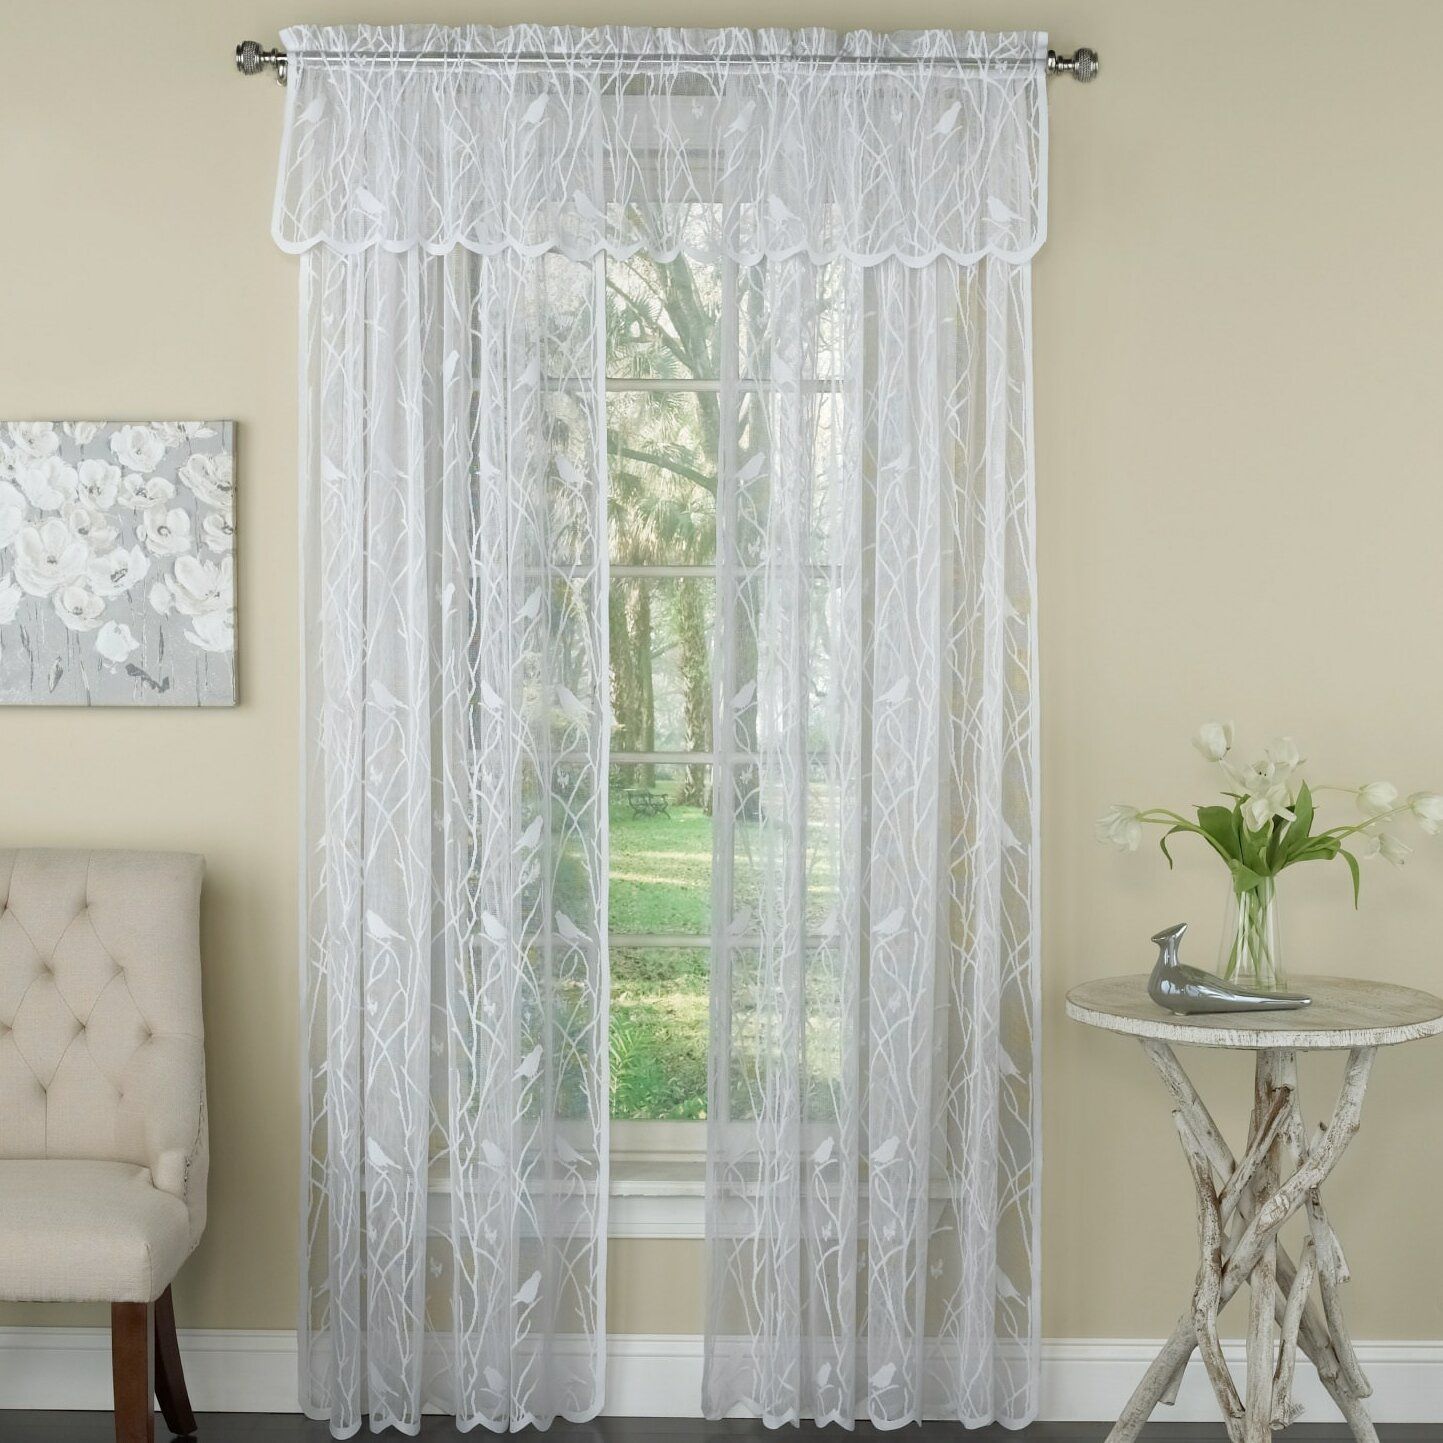 Prevatte Bird Song Lace Tier Pair Nature/floral Semi Sheer Rod Pocket  Single Window Curtain With Tranquility Curtain Tier Pairs (View 20 of 20)